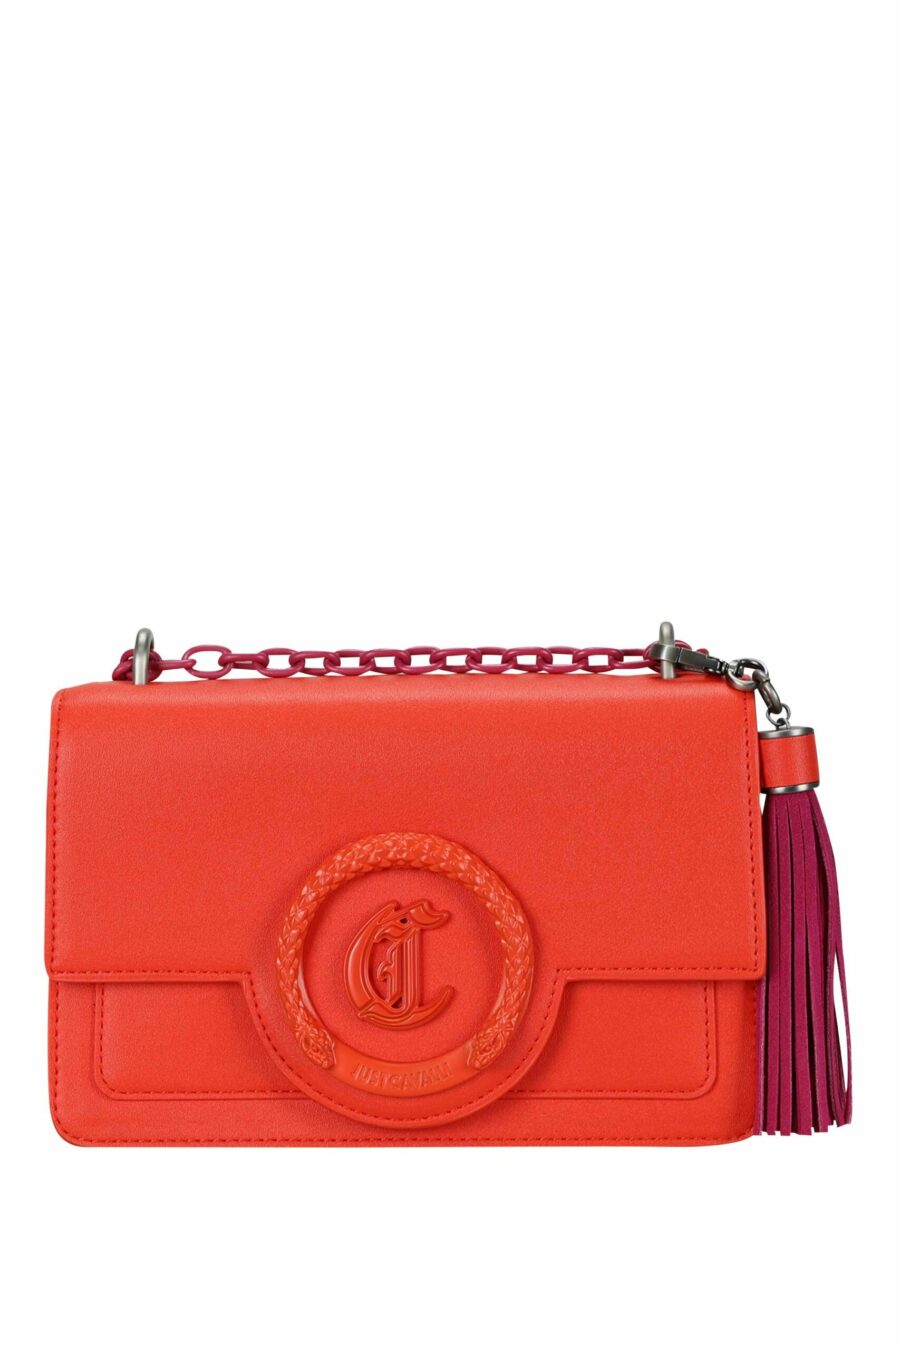 Coral coloured shoulder bag with chain and monochrome circular "c" logo - 8052672642684 scaled